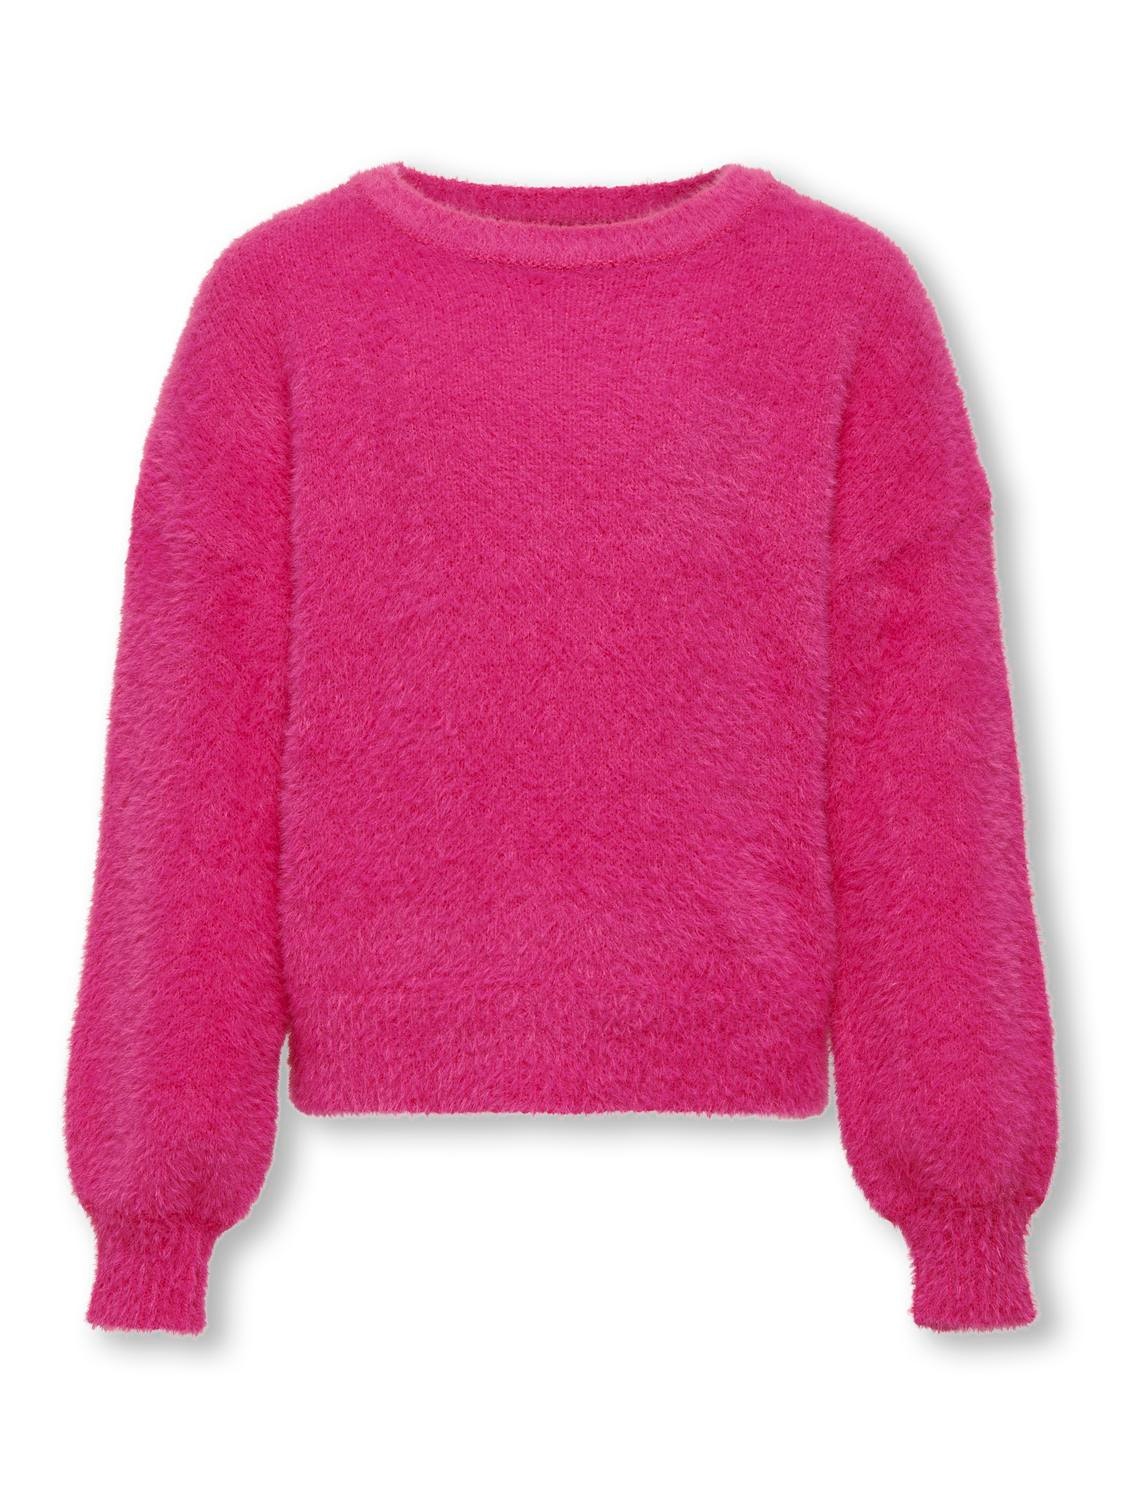 ONLY Standard Fit Round Neck High cuffs Dropped shoulders Pullover -Fuchsia Purple - 15306452